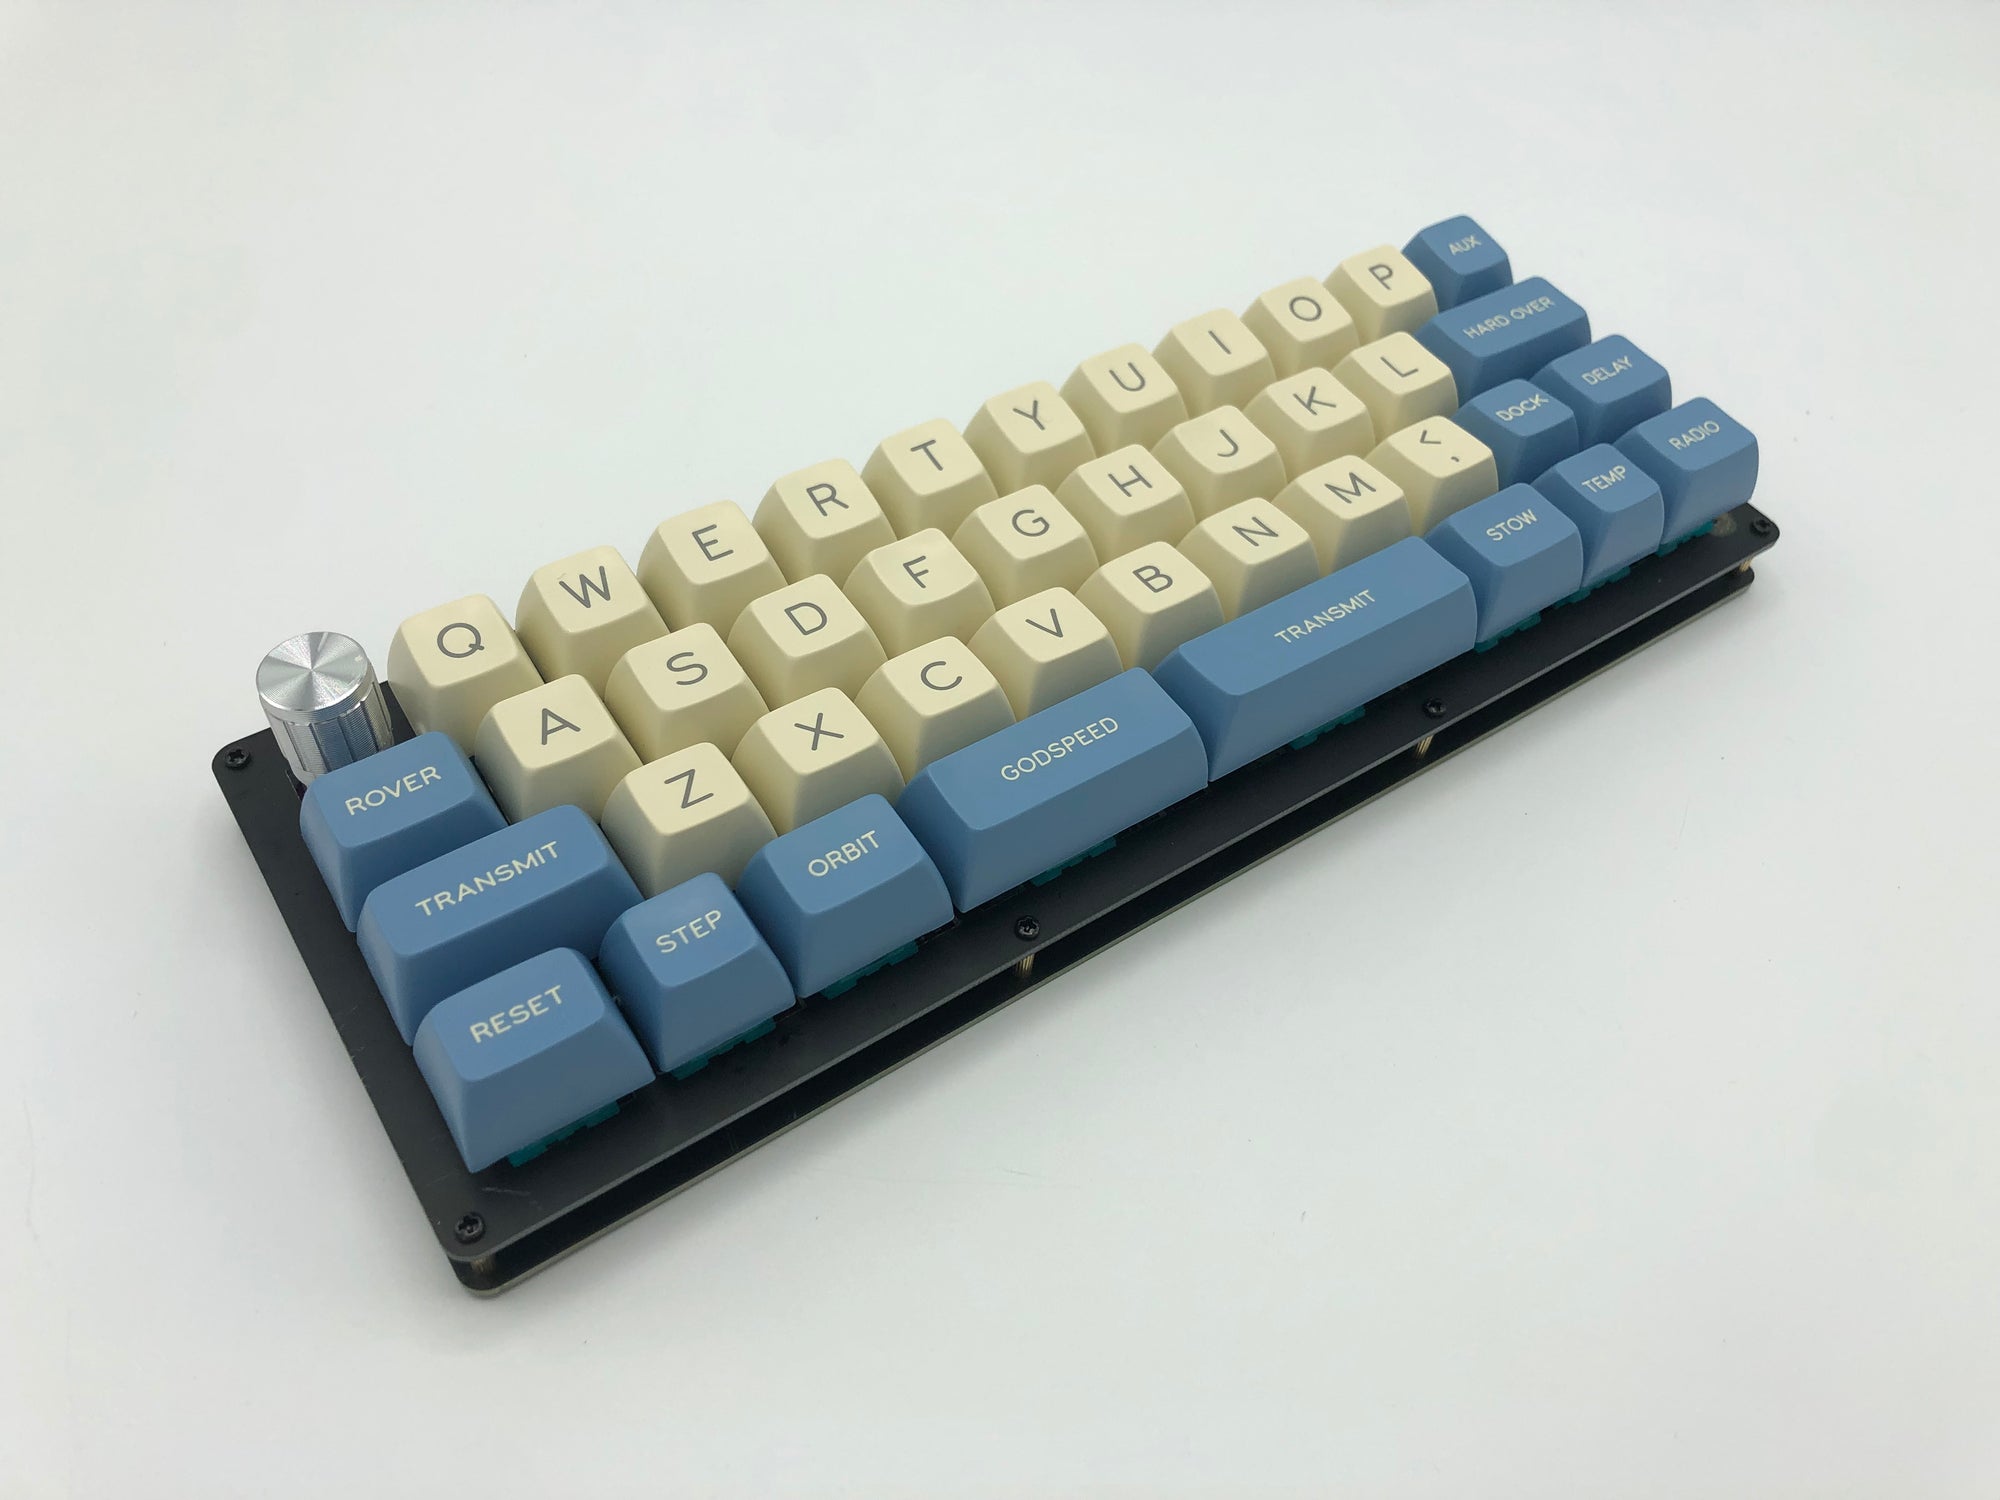 DSP40 PCB - 40% Staggered or Ortholinear Keyboard